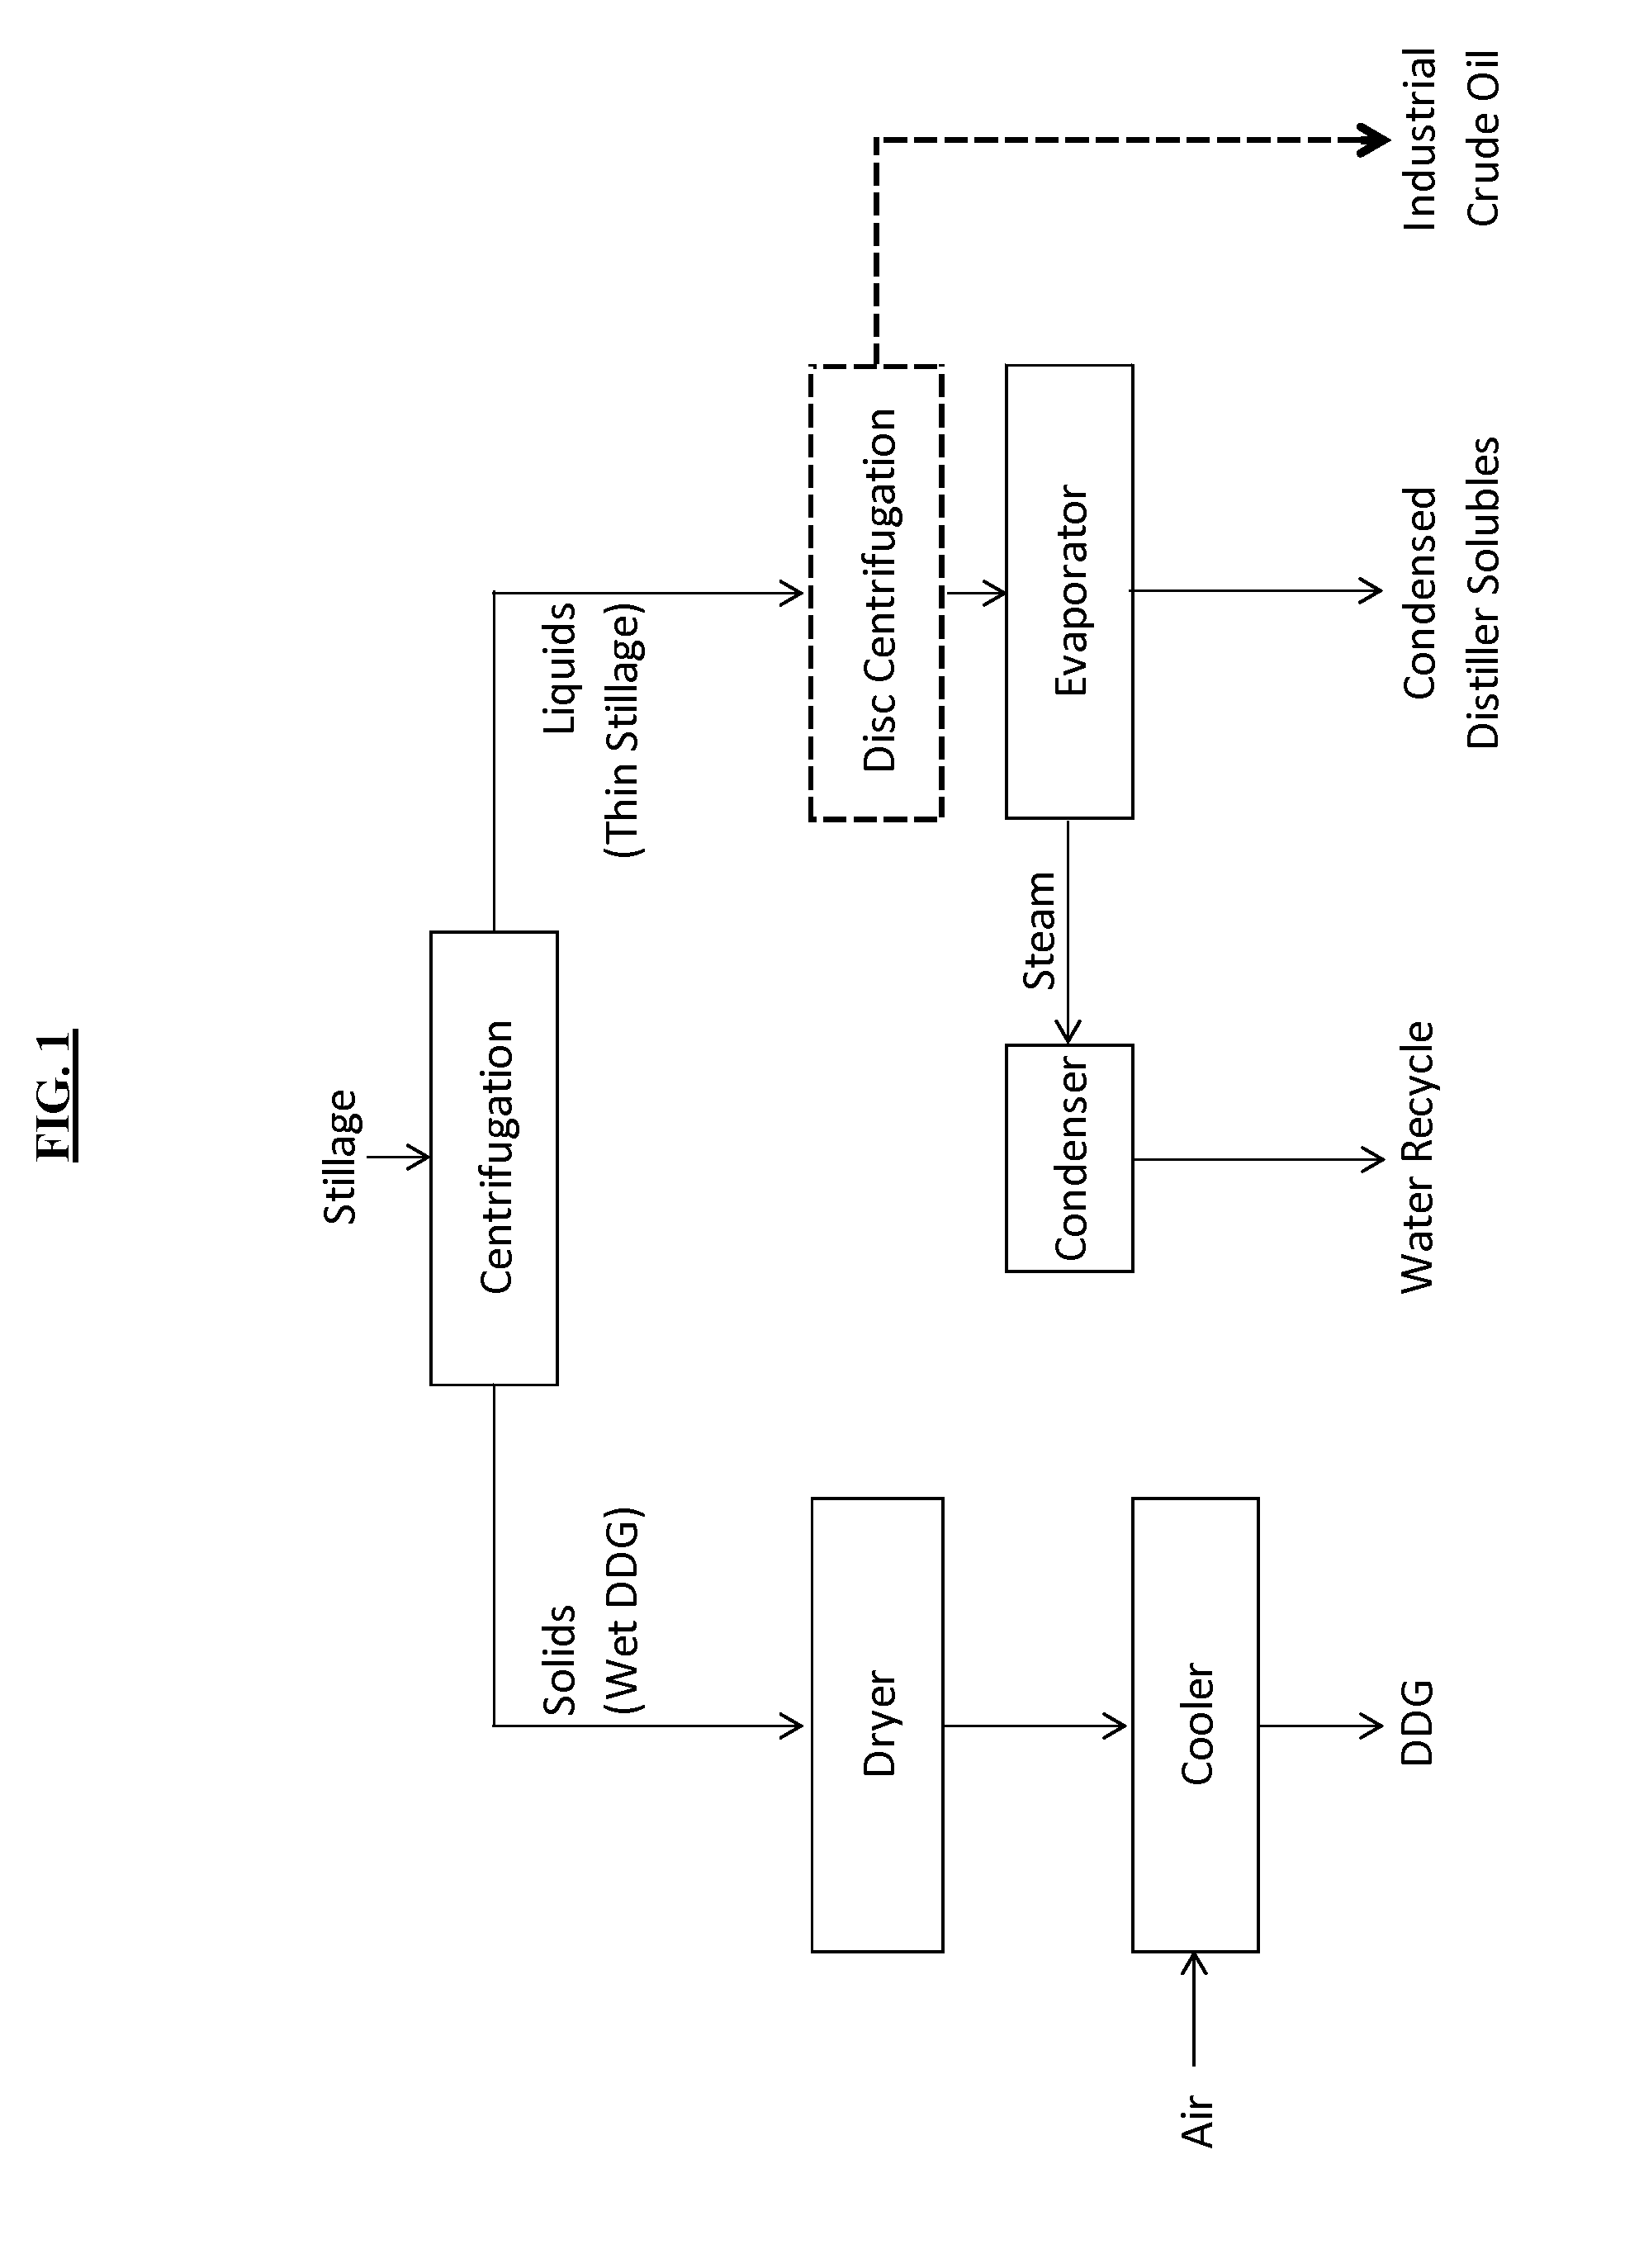 Processes and systems for co-producing fermentation products, fertilizers, and distillers grains from starch-containing feedstocks, and compositions produced therefrom